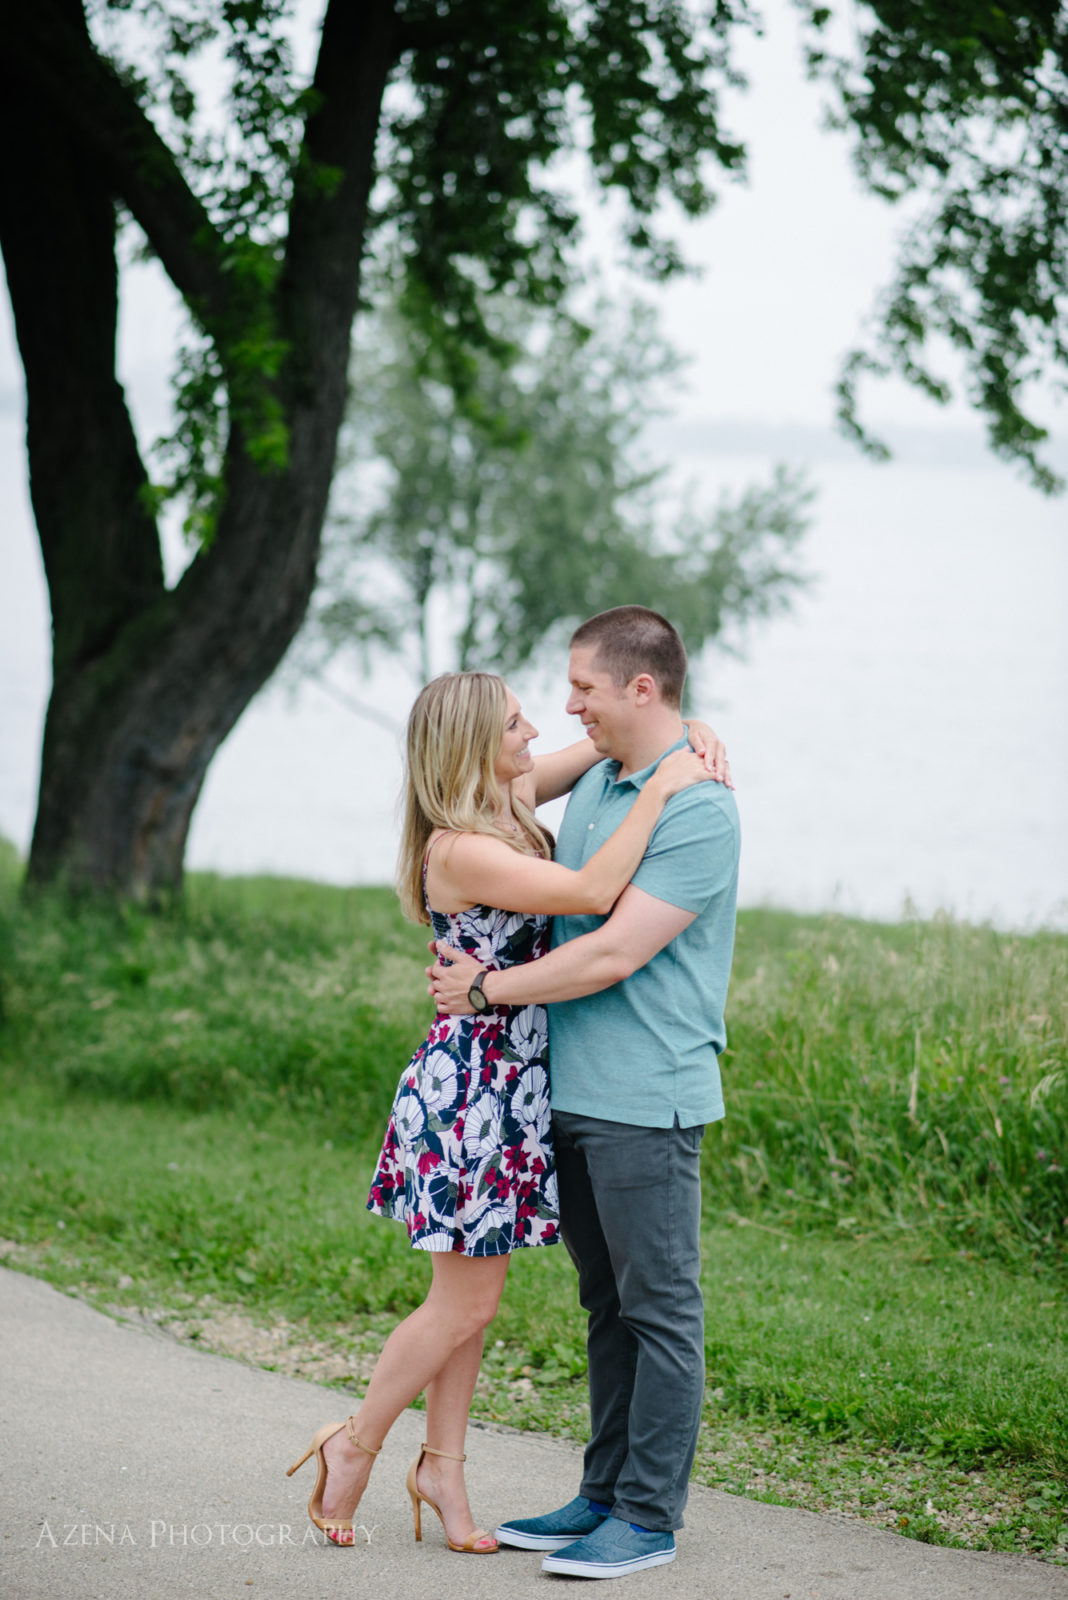 Taking a walk by Lake Monona for engagement session